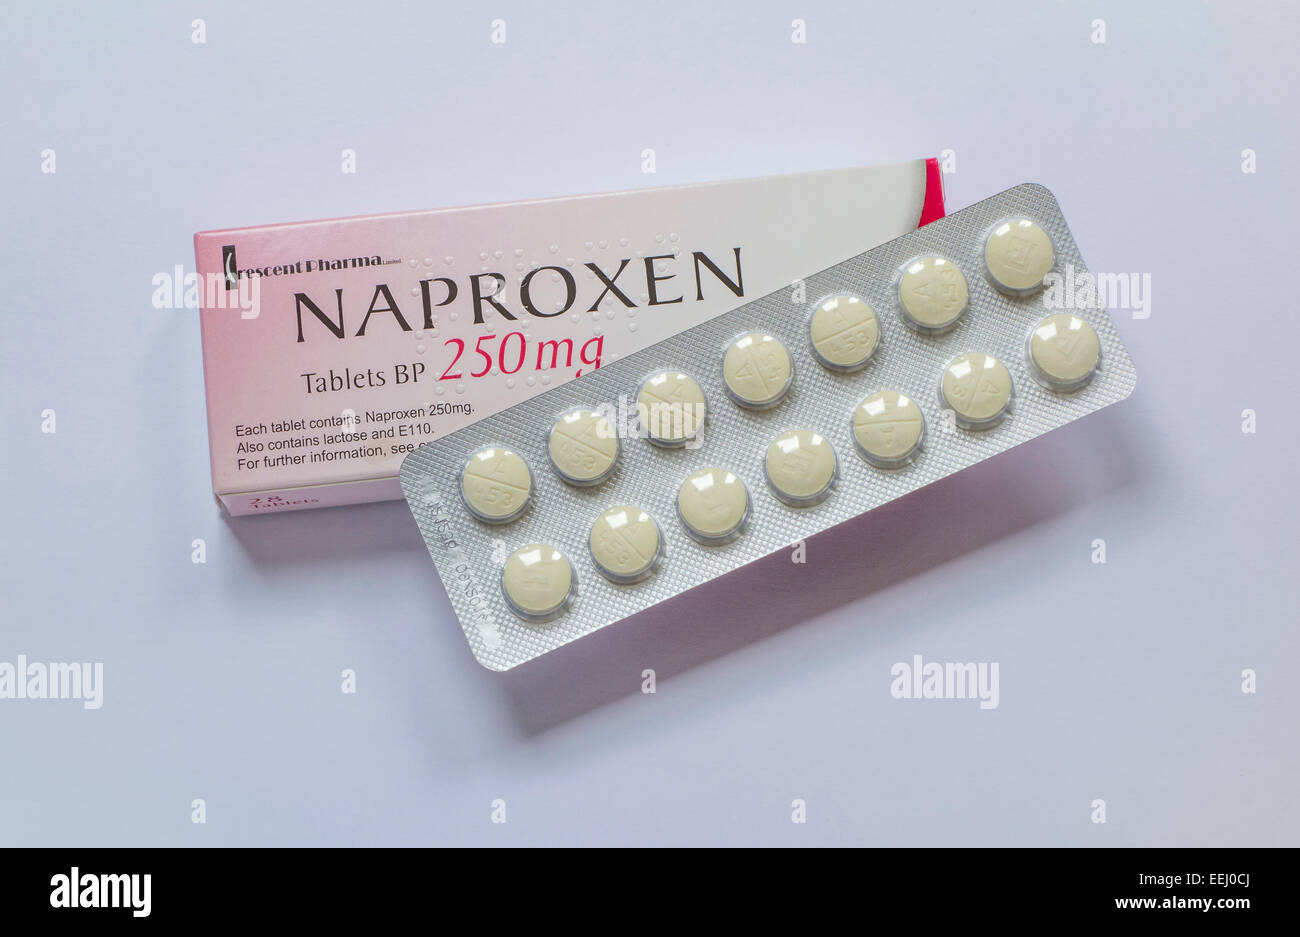 klonopin dosage forms for naproxen sodium